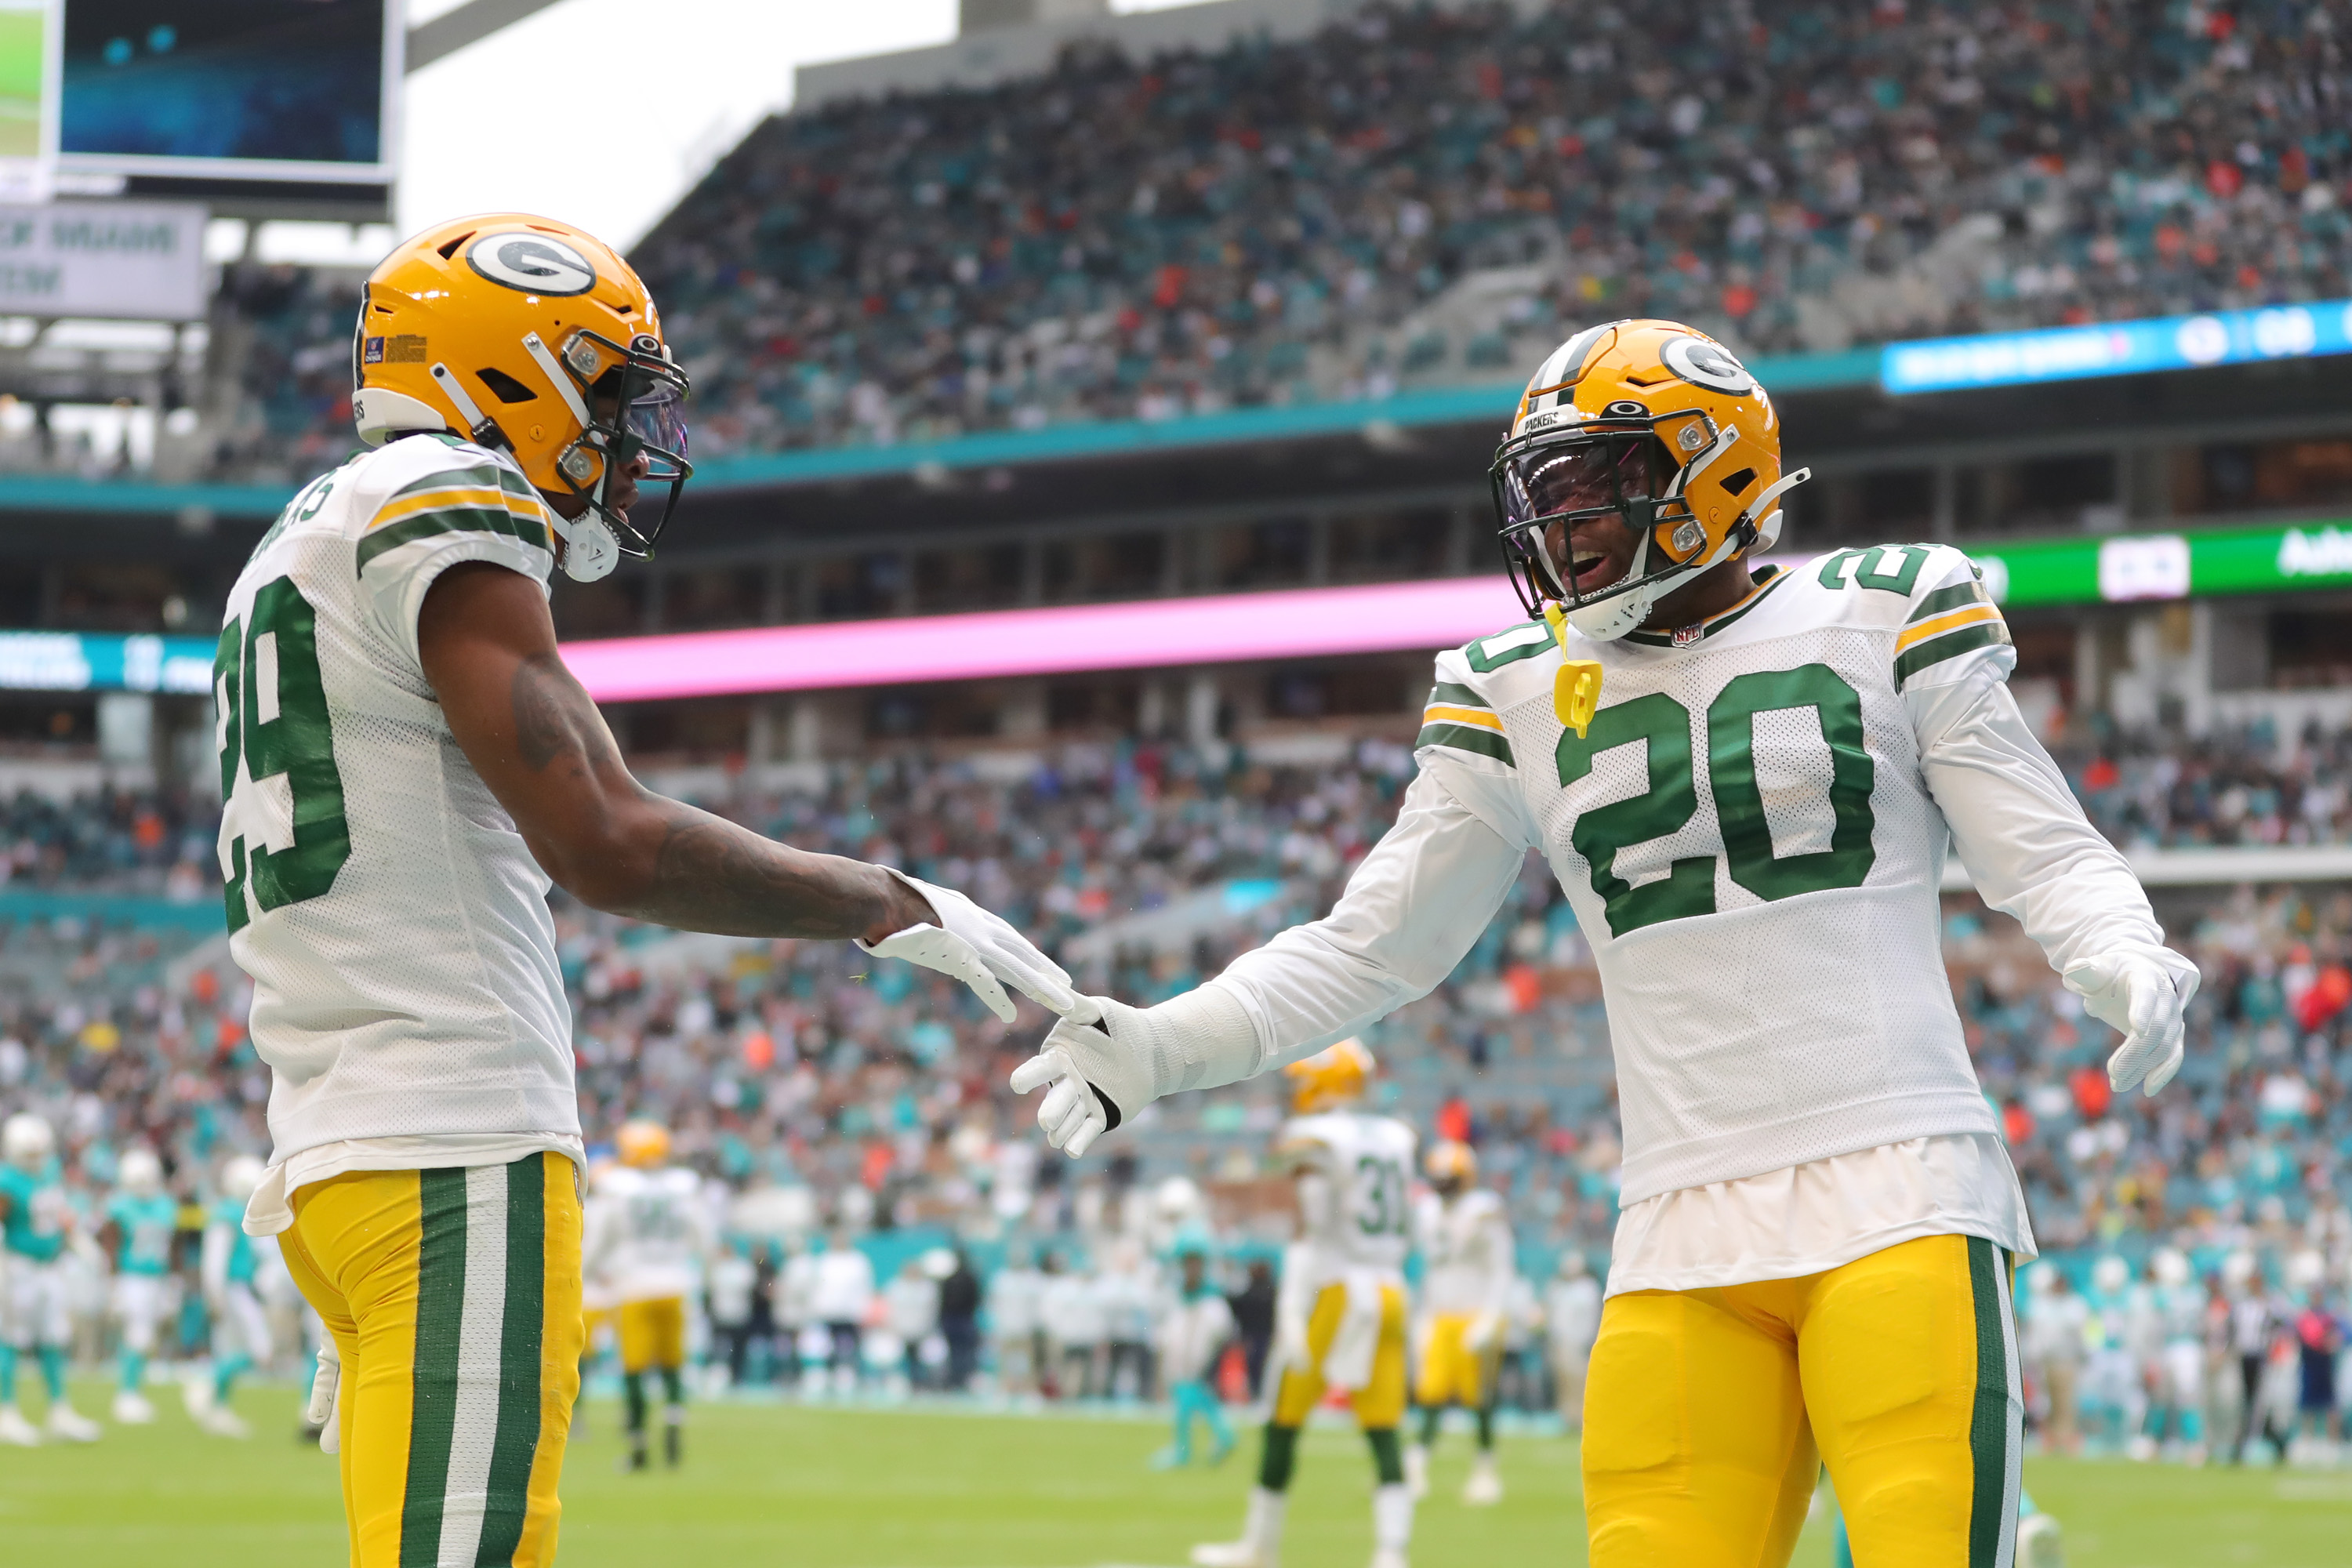 Tagovailoa throws 3 picks, Packers defeat Dolphins 26-20